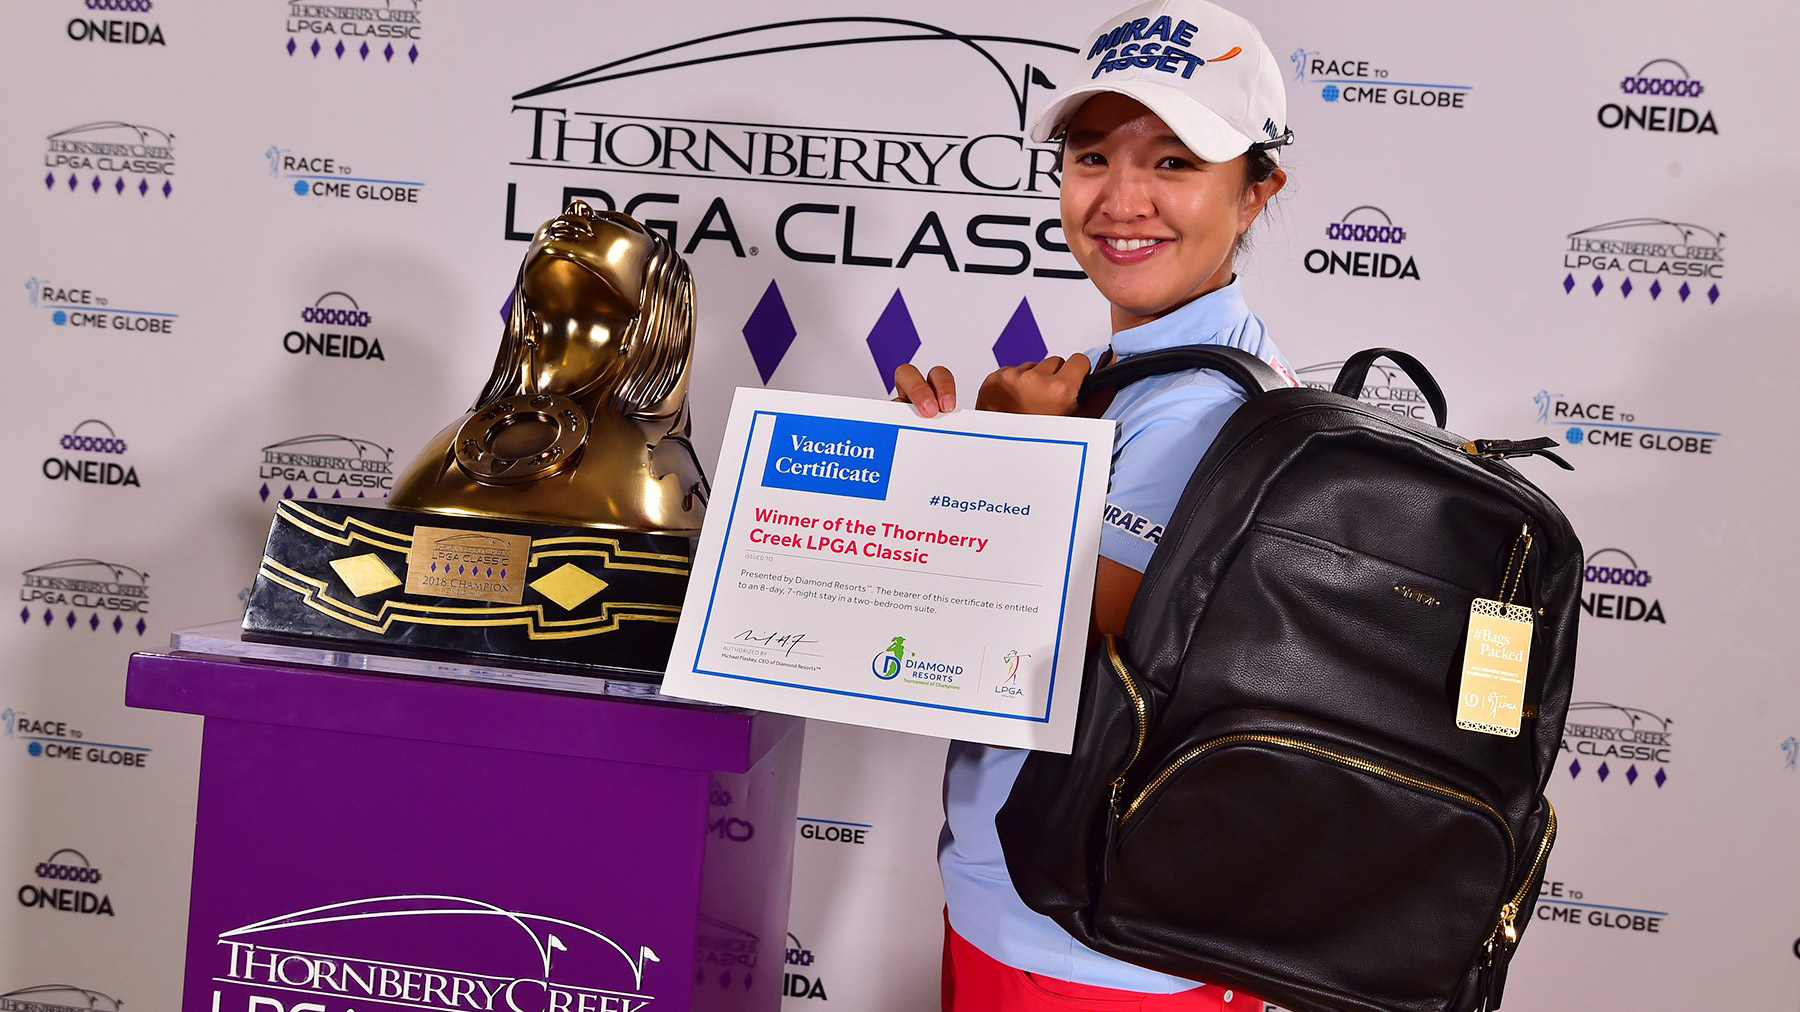 Sei Young Kim has her #BagsPacked for the 2018 Diamond Resorts Tournament of Champions after her victory at the 2018 Thornberry Creek LPGA Classic